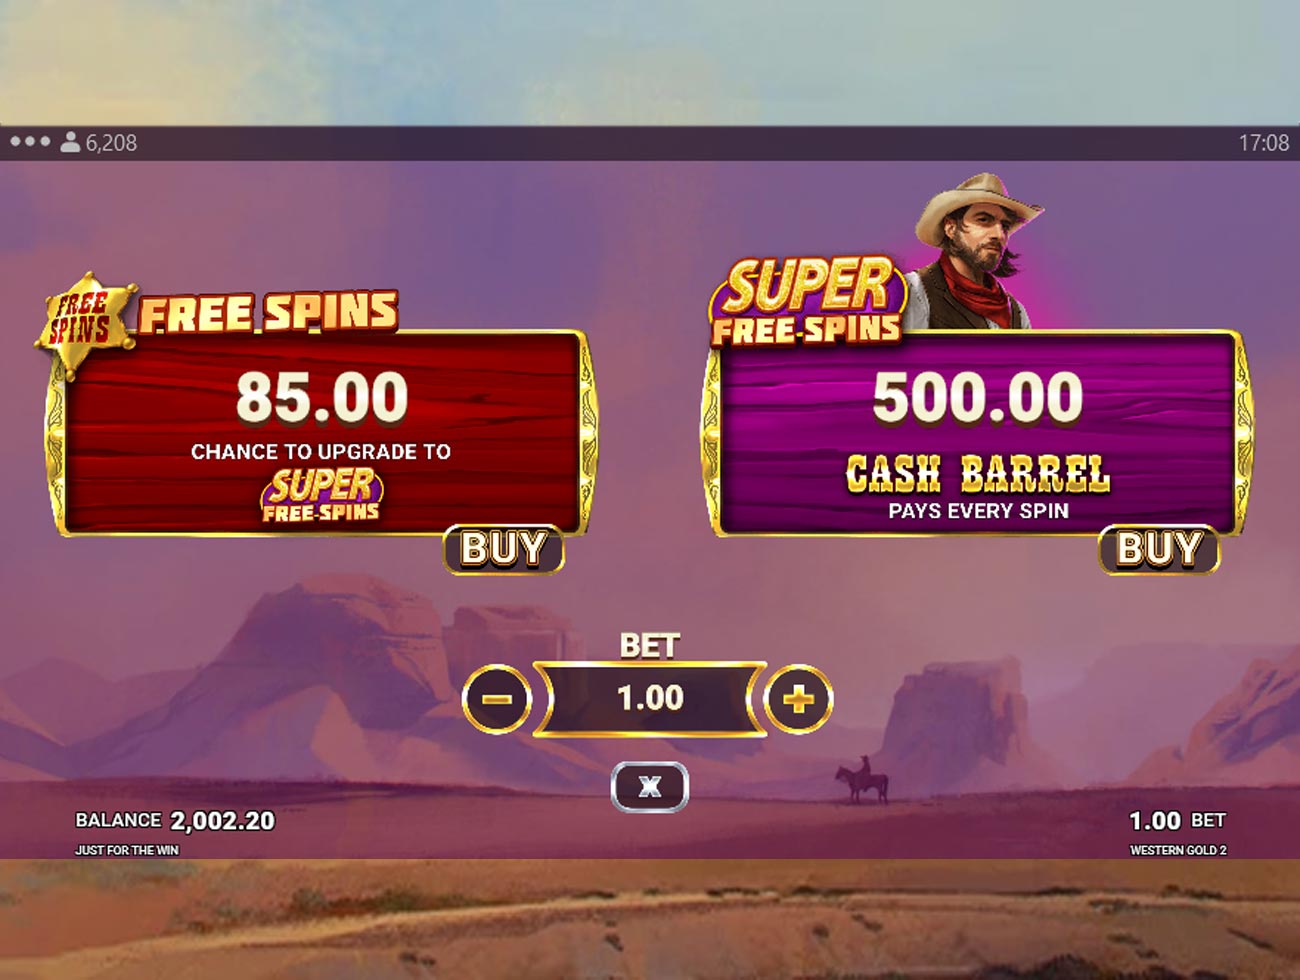 Western Gold 2 Double Barrel Buy Feature